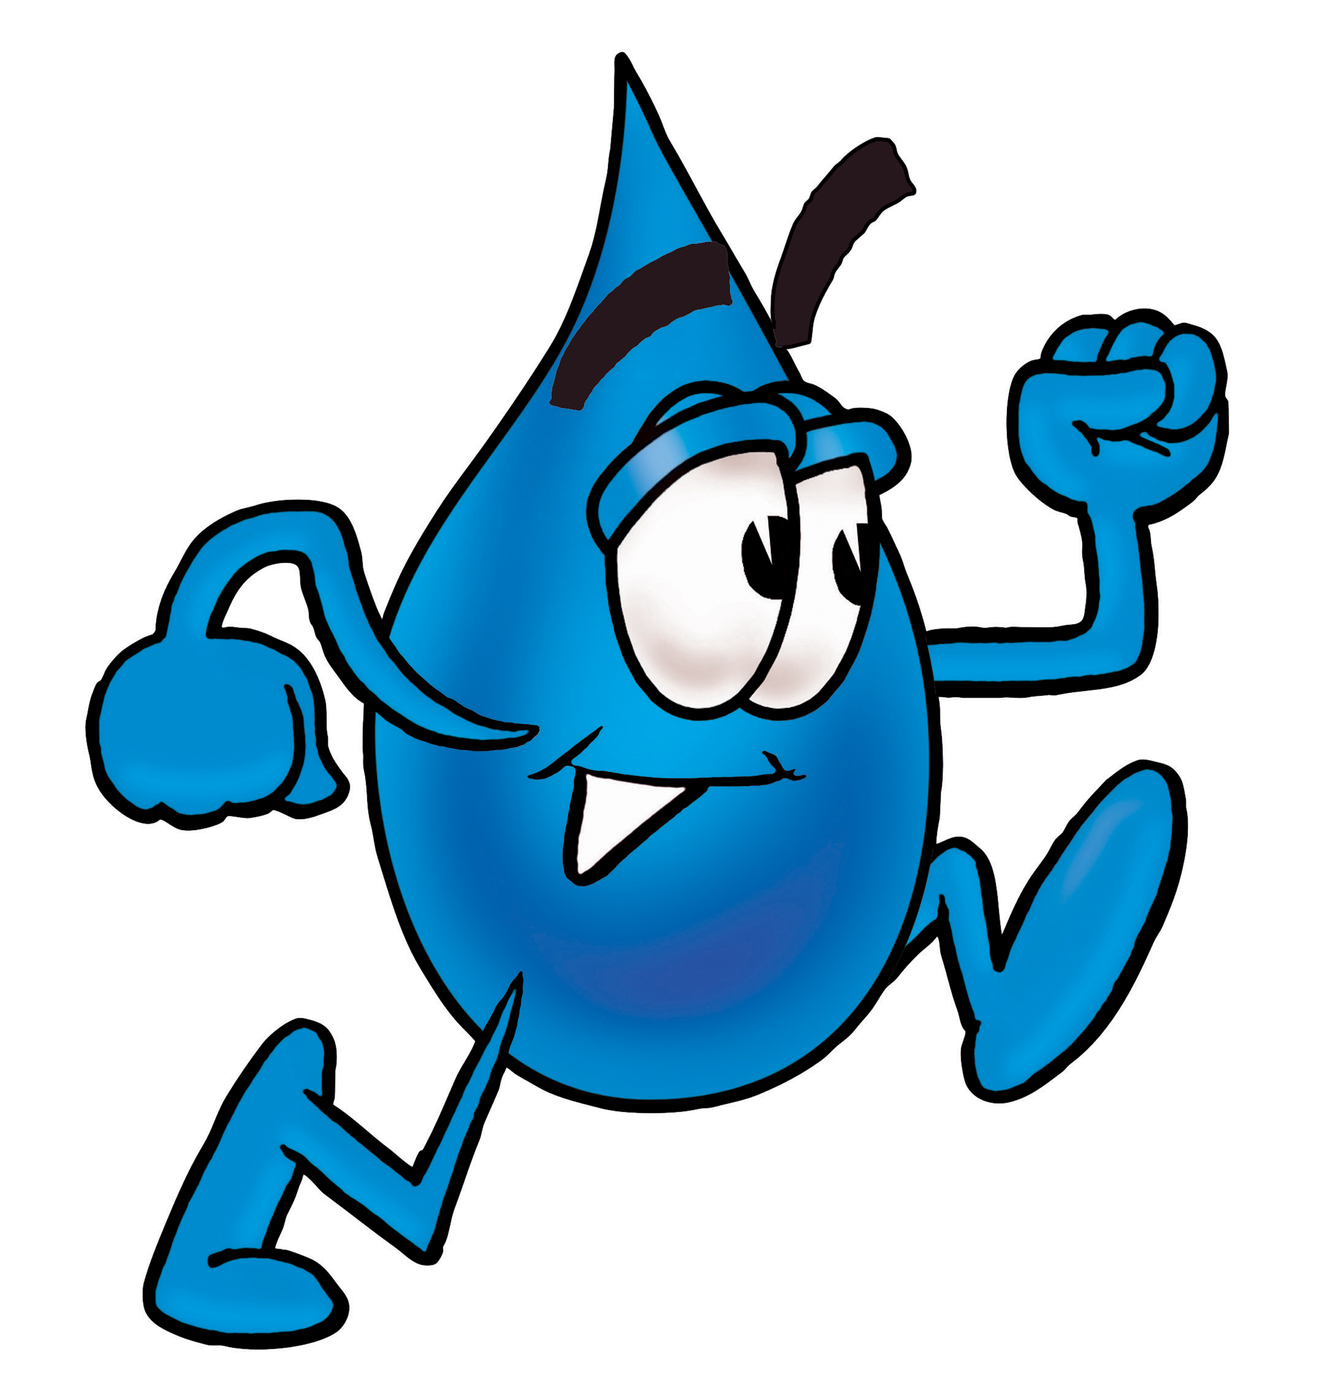 Water bottle clipart free images 2